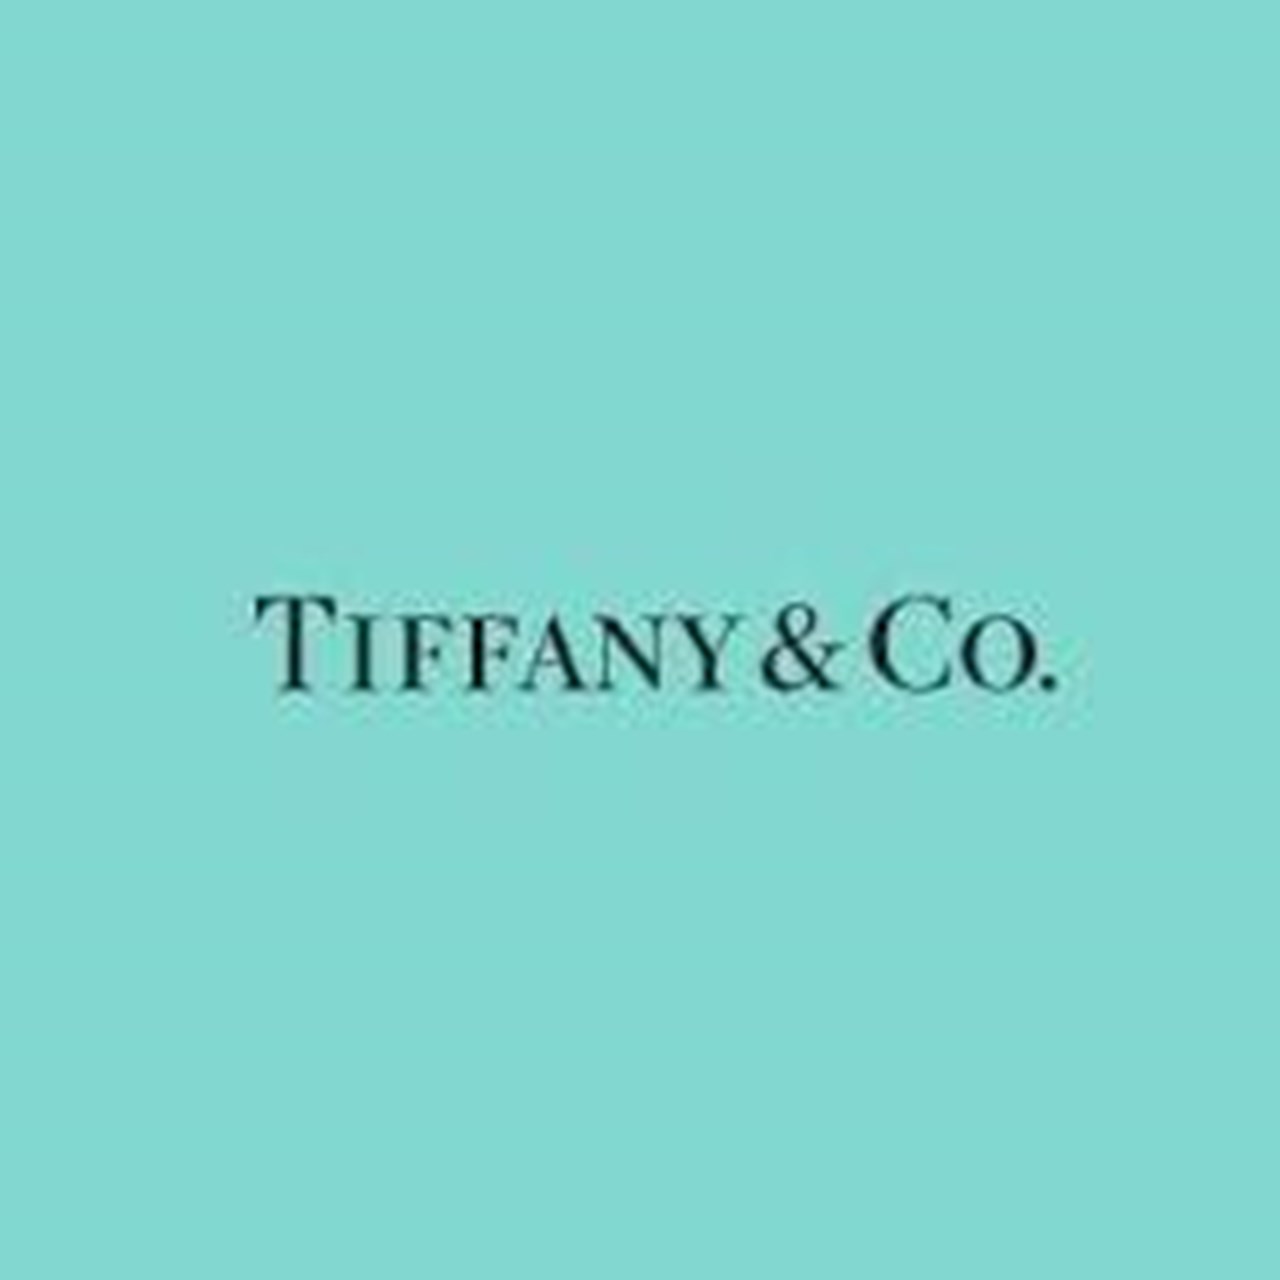 Tiffany unveils revamped New York flagship, showcasing new look